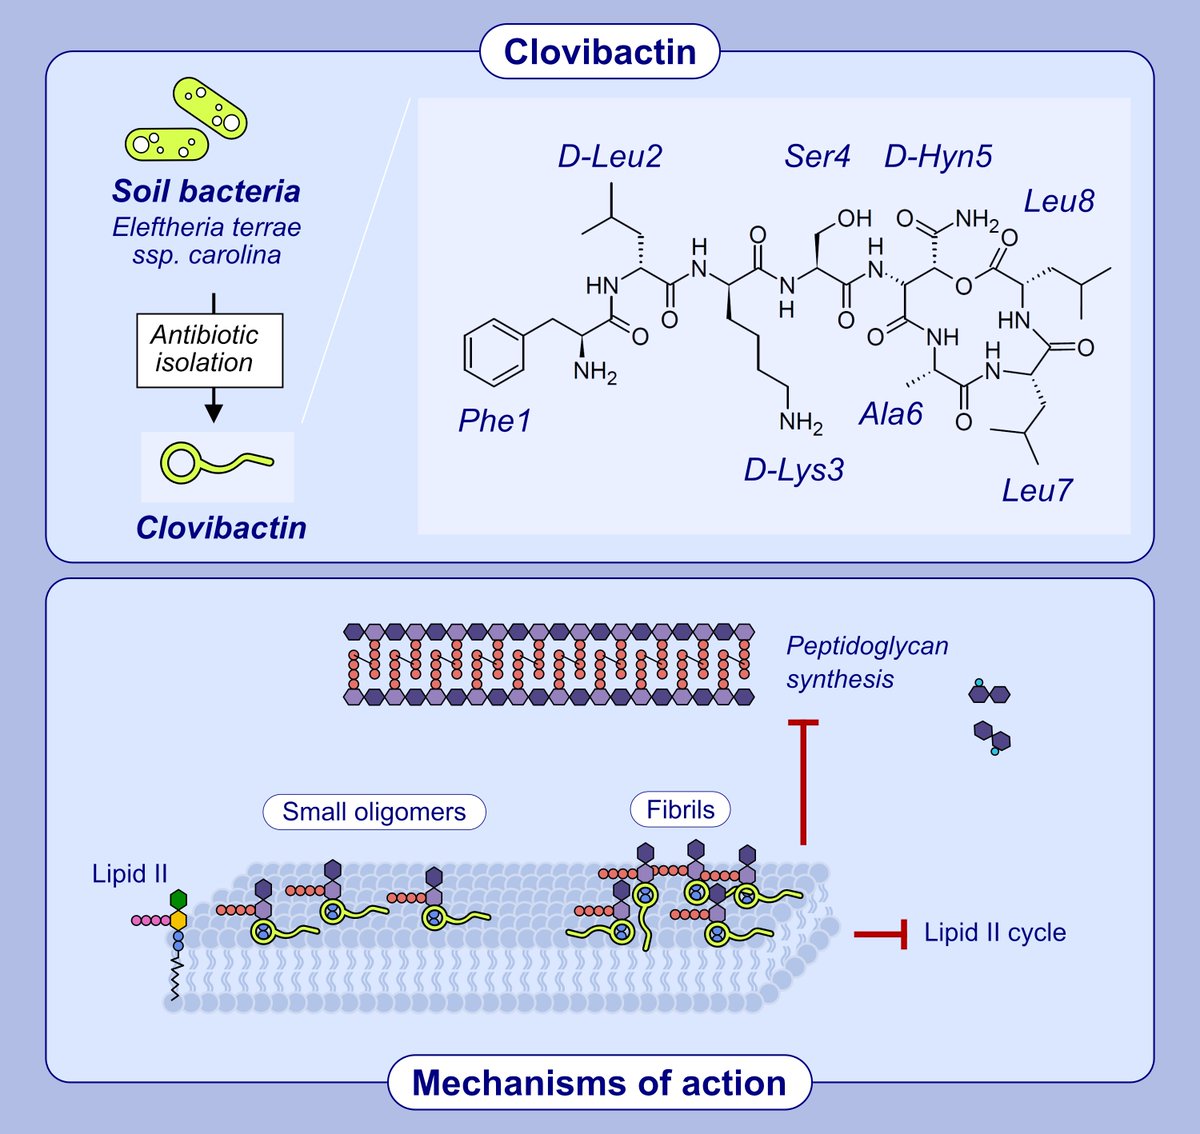 Clovibactin: Discovery and antimicrobial mechanism of action. Ana M. Pérez-Moreno, Pablo Torres, Juan L. Paris

Read the article here: doi.org/10.1111/all.16…

Antibiotic resistance is a global health concern. This is an article from our series “News and Views: Groundbreaking